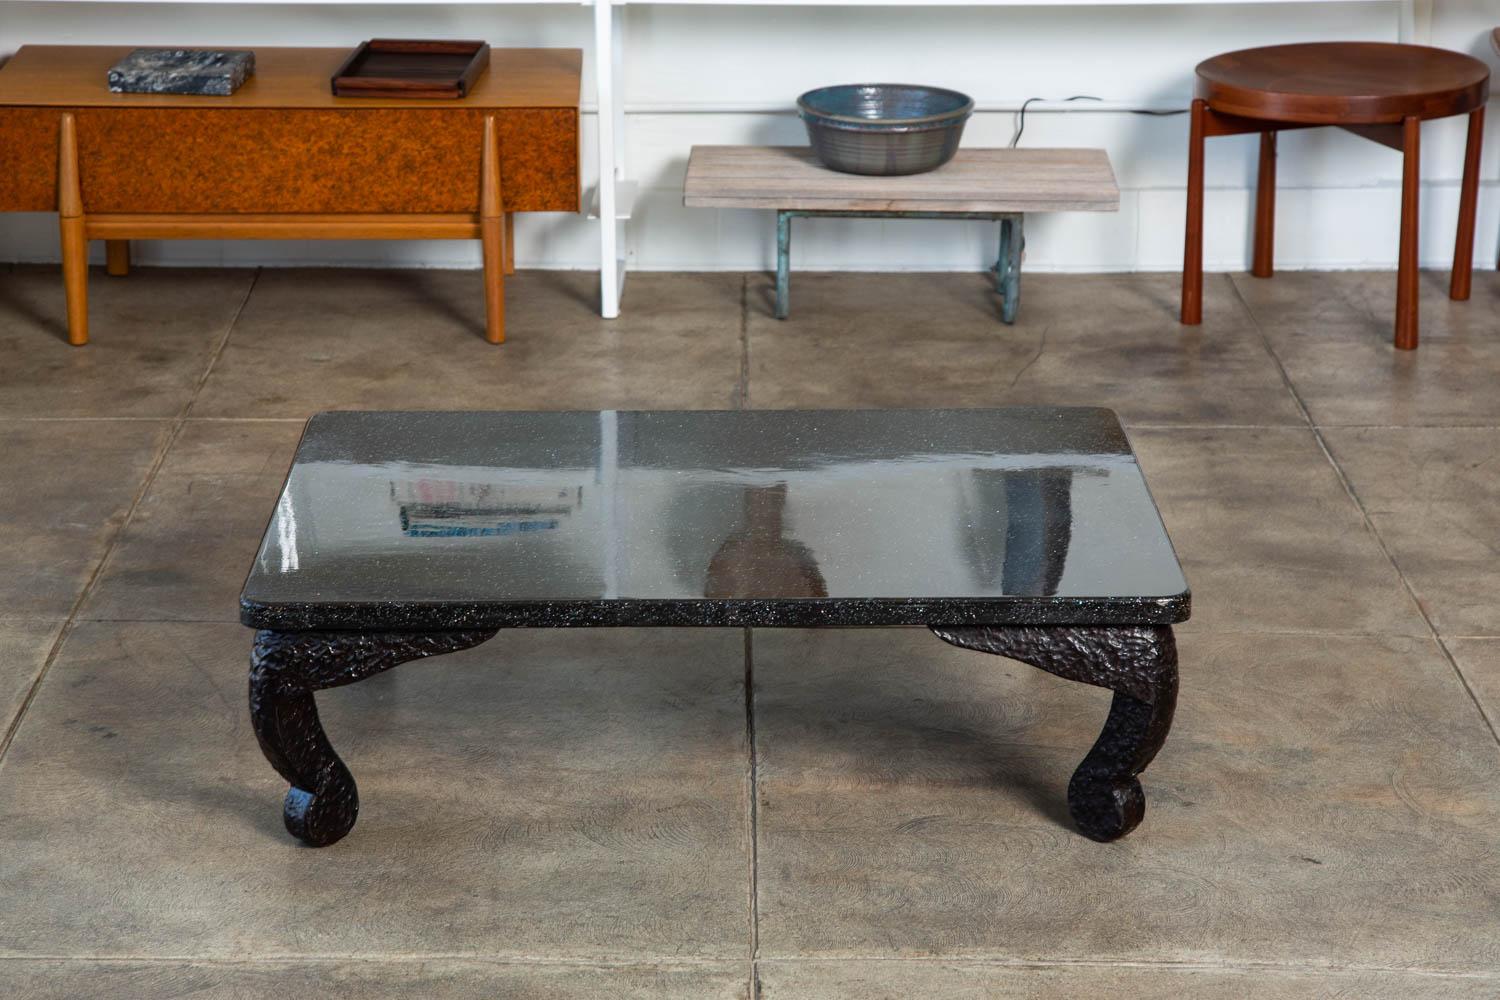 Japanese polished resin coffee table with carved textured resin legs. The black table features a smooth top with beautiful speckled detail, in contrast to the legs, that have a textured hammered look.

Condition: Excellent vintage condition,